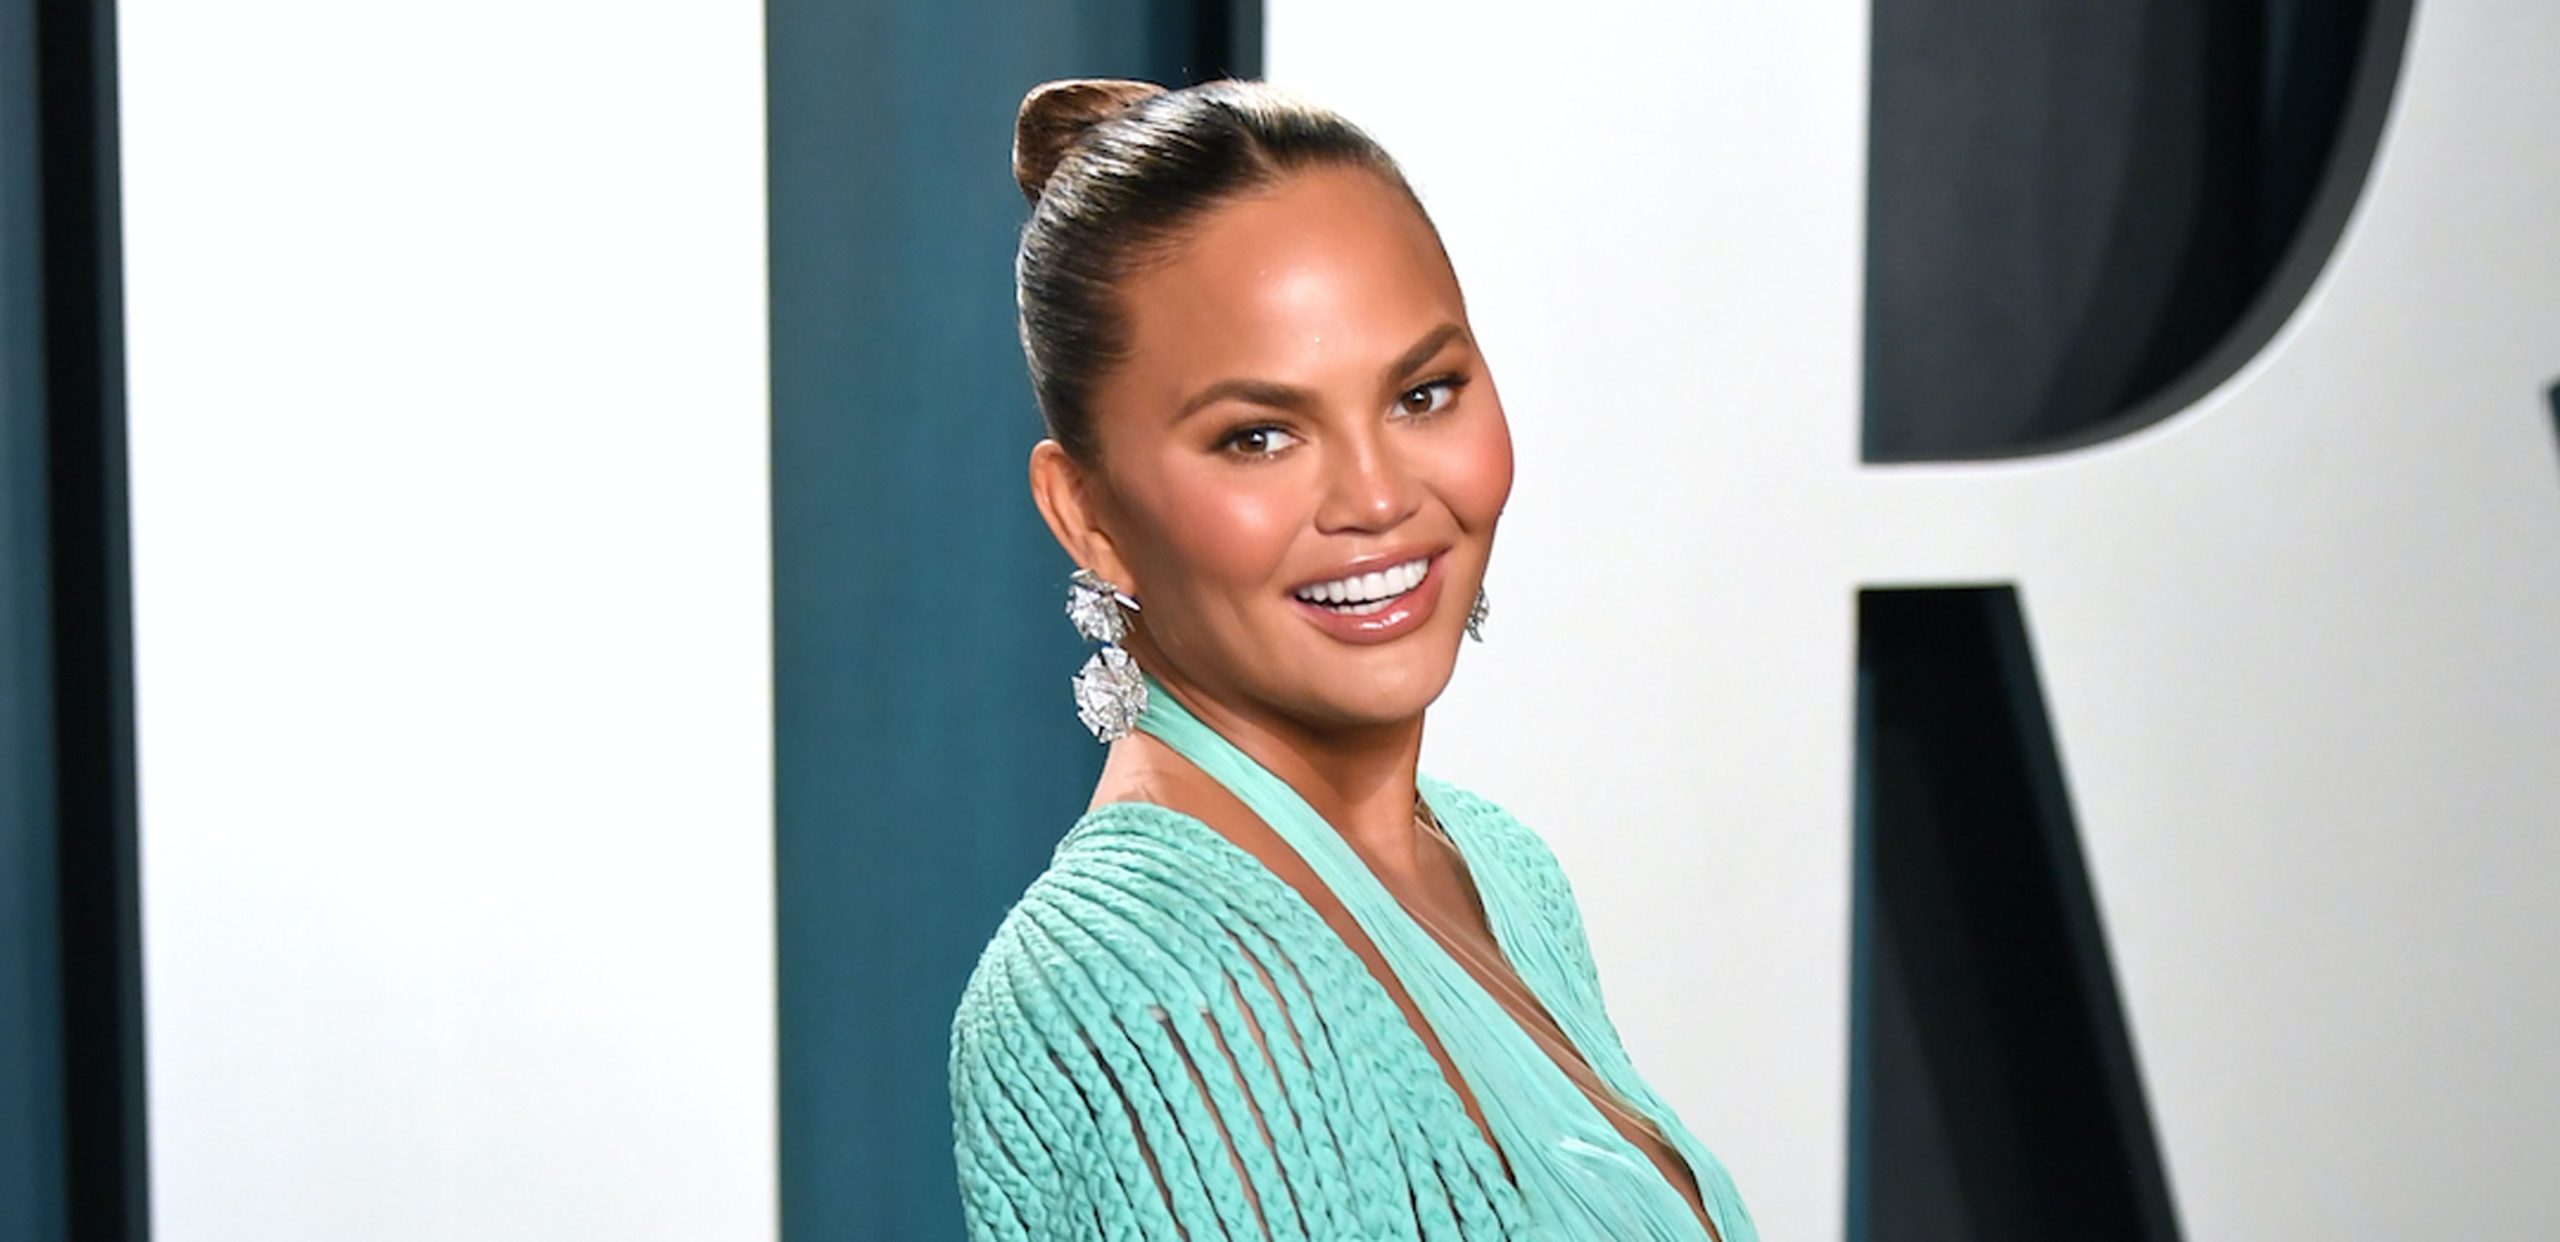 Chrissy Teigen Just Made the Cutest Flower Crowns With Her Kids — See the Photos